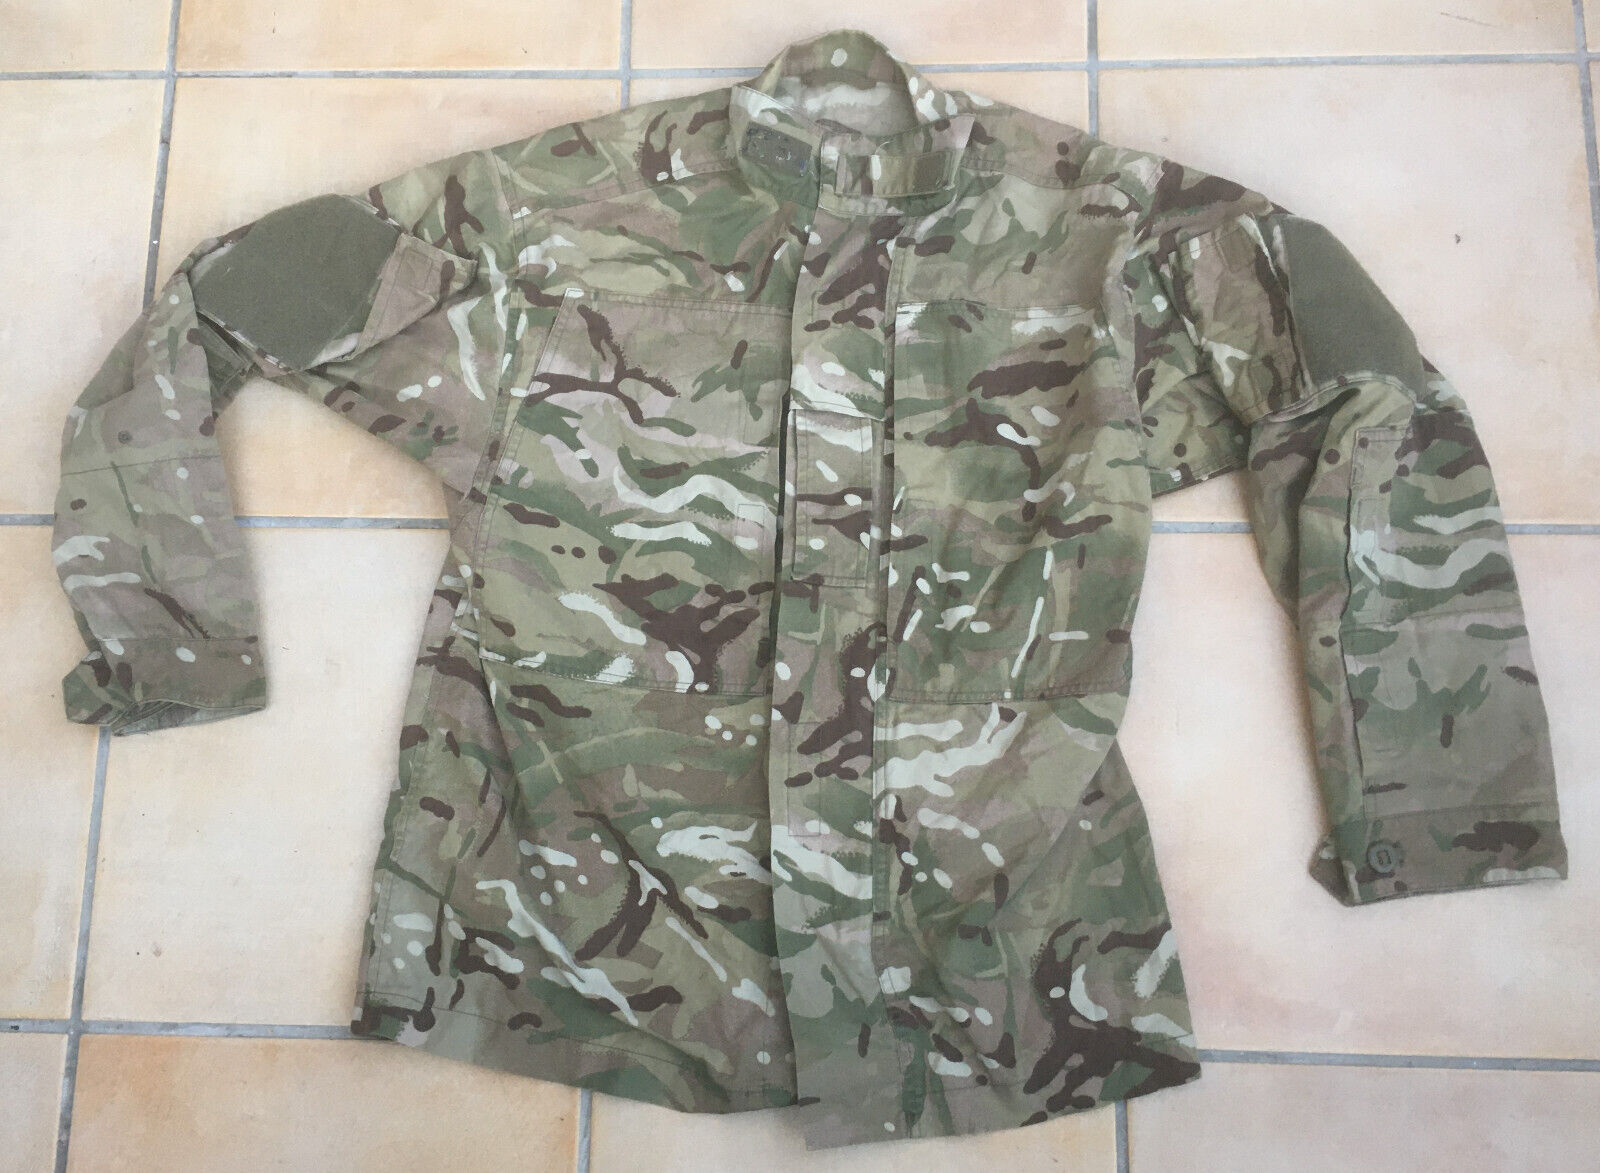 British army, Temperate Weather shirt / jacket in MTP